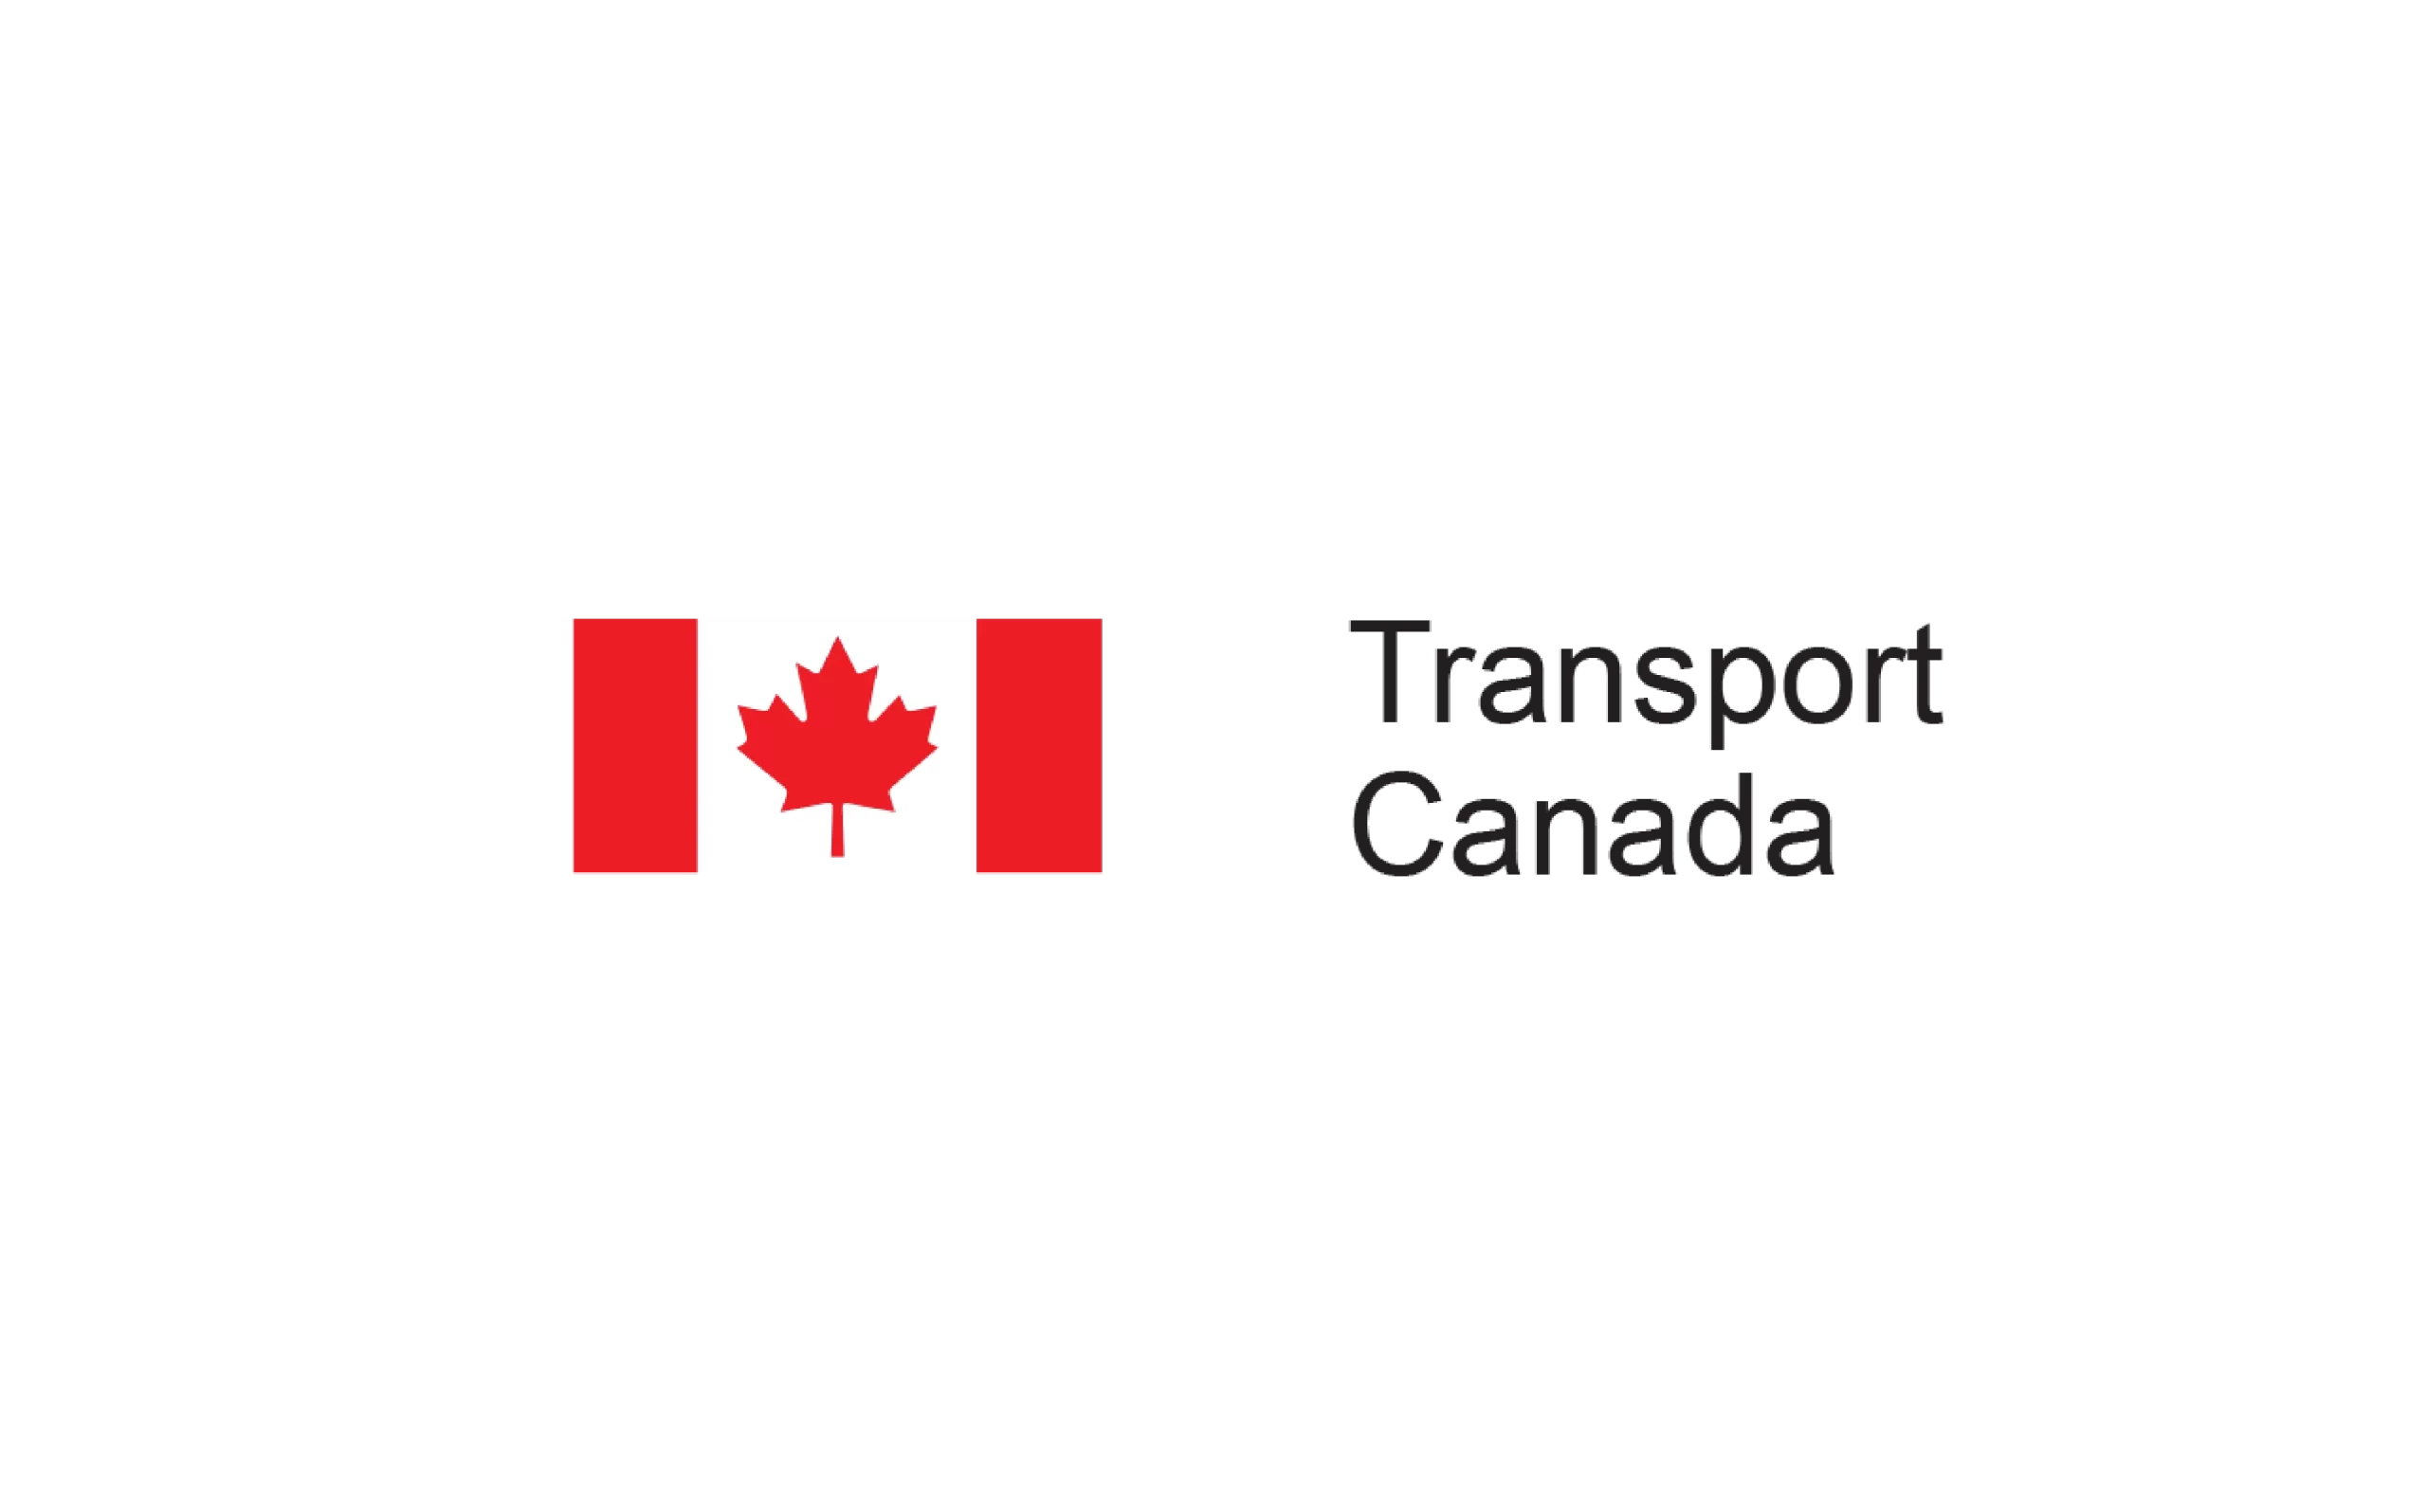 Red and white Transport Canada logo